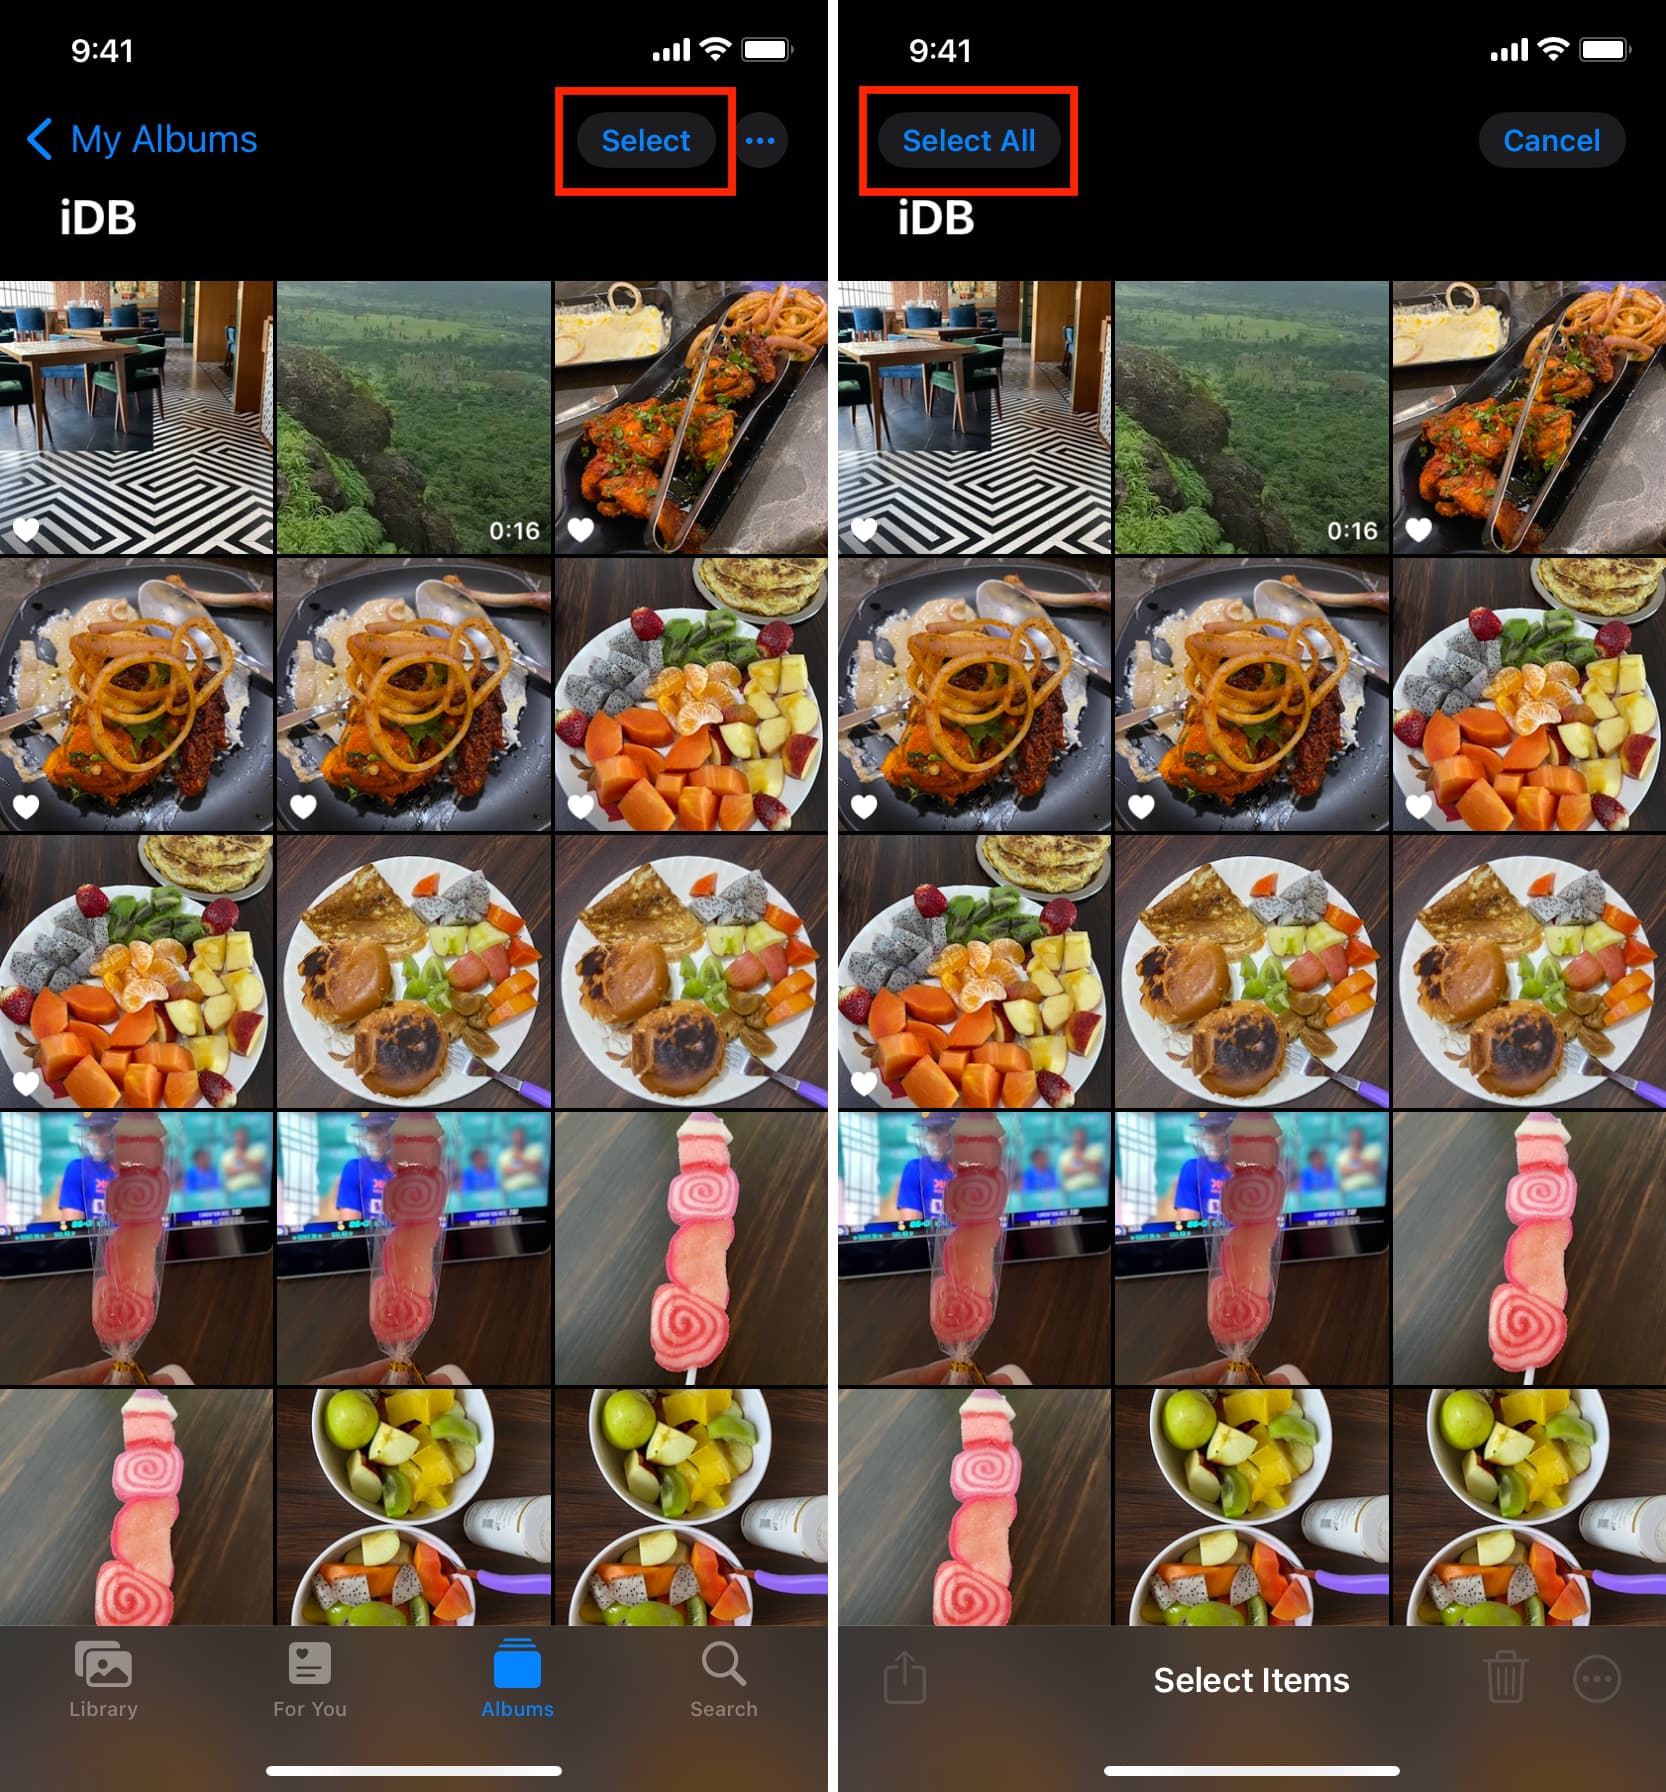 Select all photos of an album on iPhone